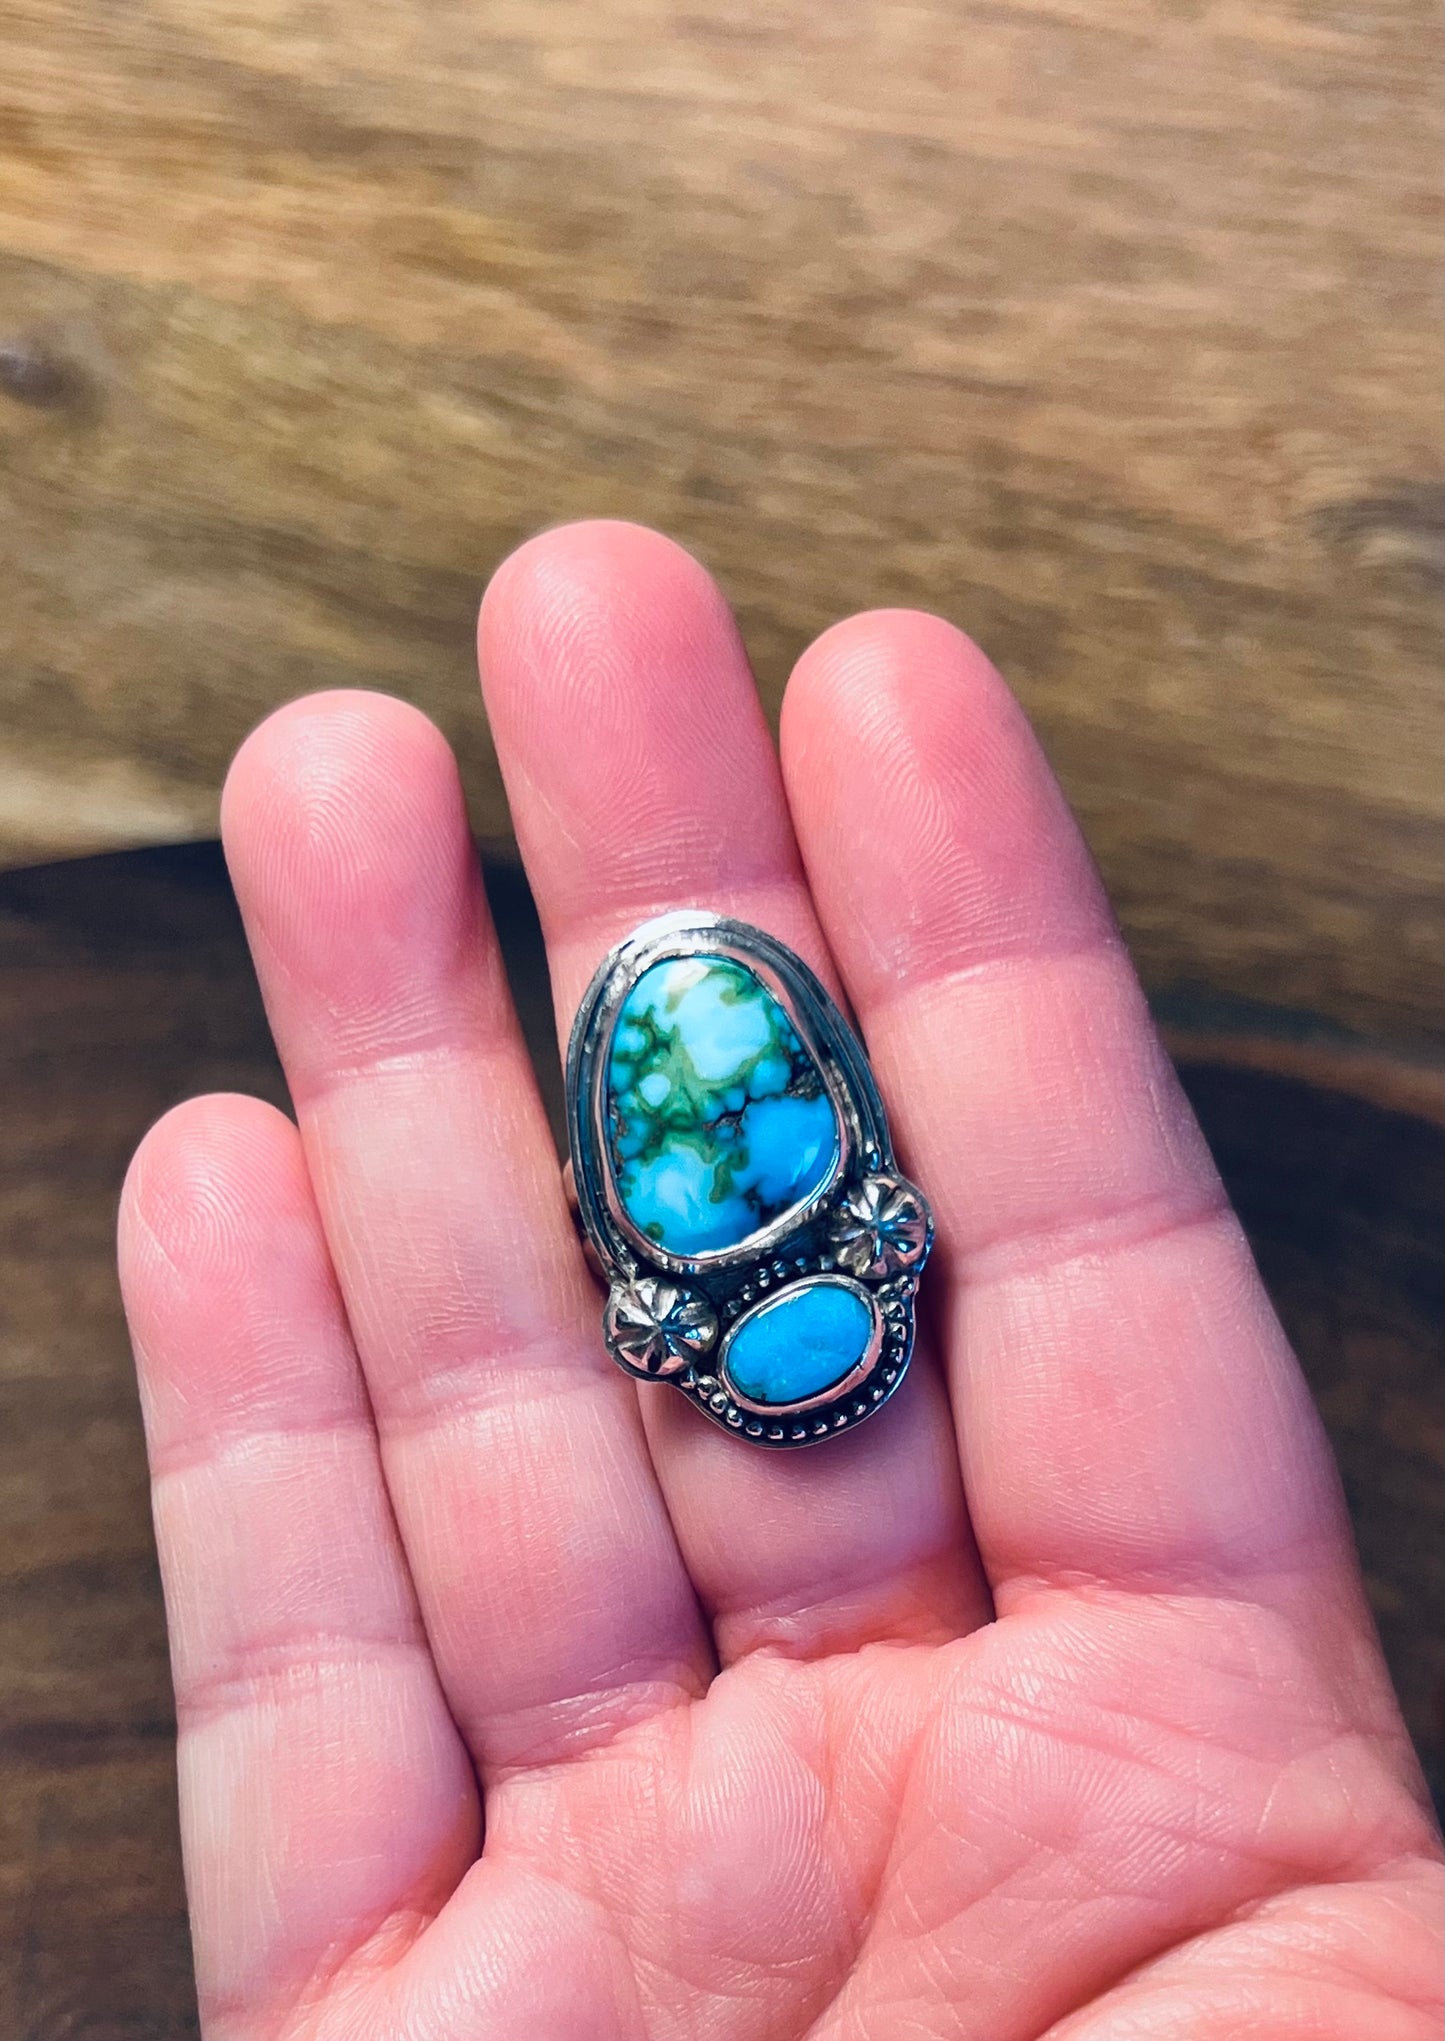 Sonora Gold and Mountain Turquoise Sterling Silver Ring